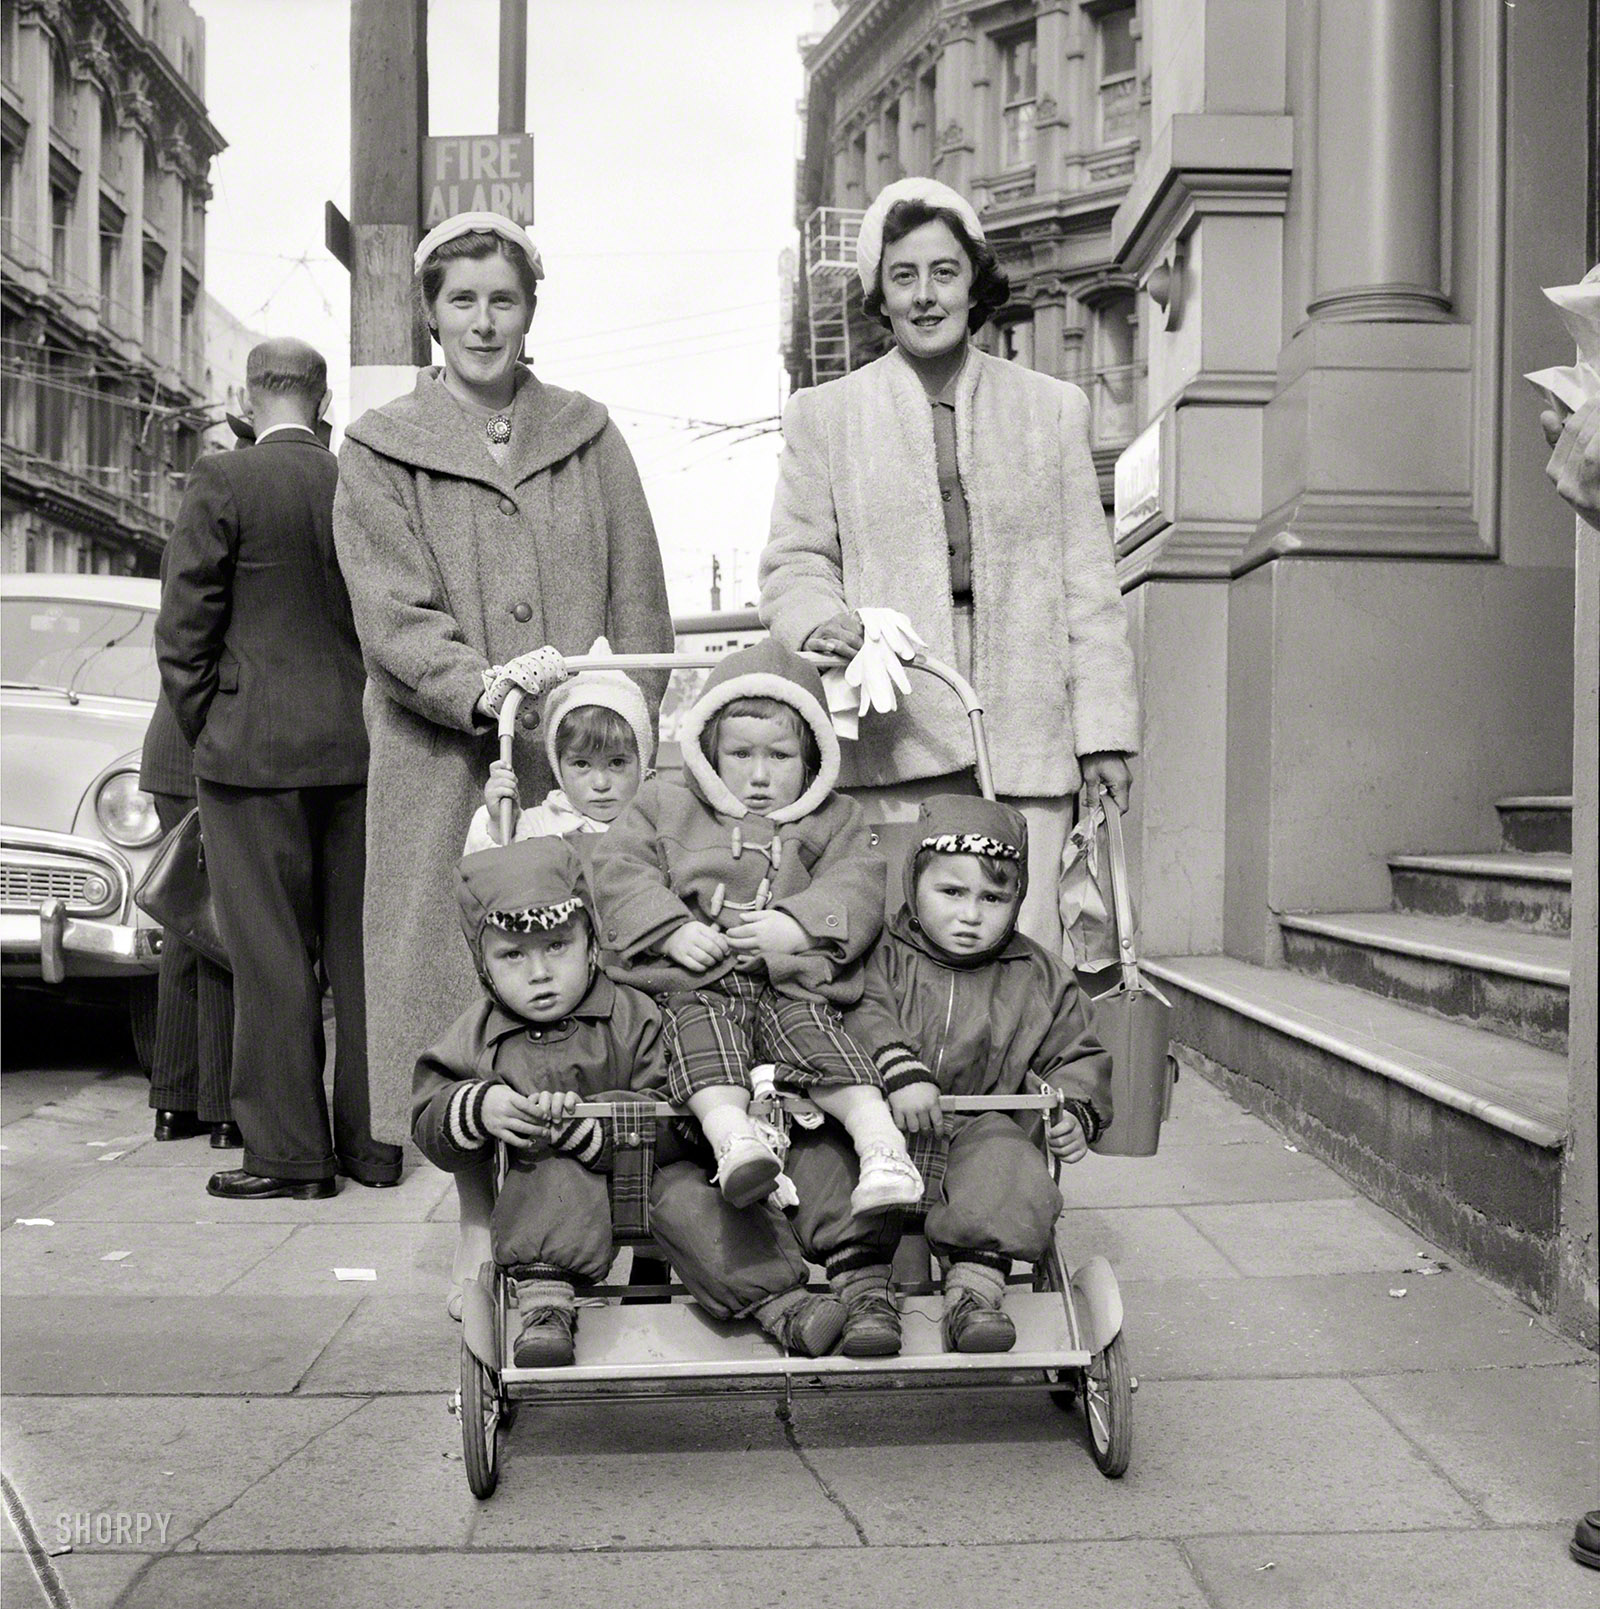 Aug. 21, 1959, somewhere in New Zealand. "Two women with four small children in a pushchair on a city street, probably Wellington." Evening Post newspaper photograph collection, Alexander Turnbull Library. View full size.